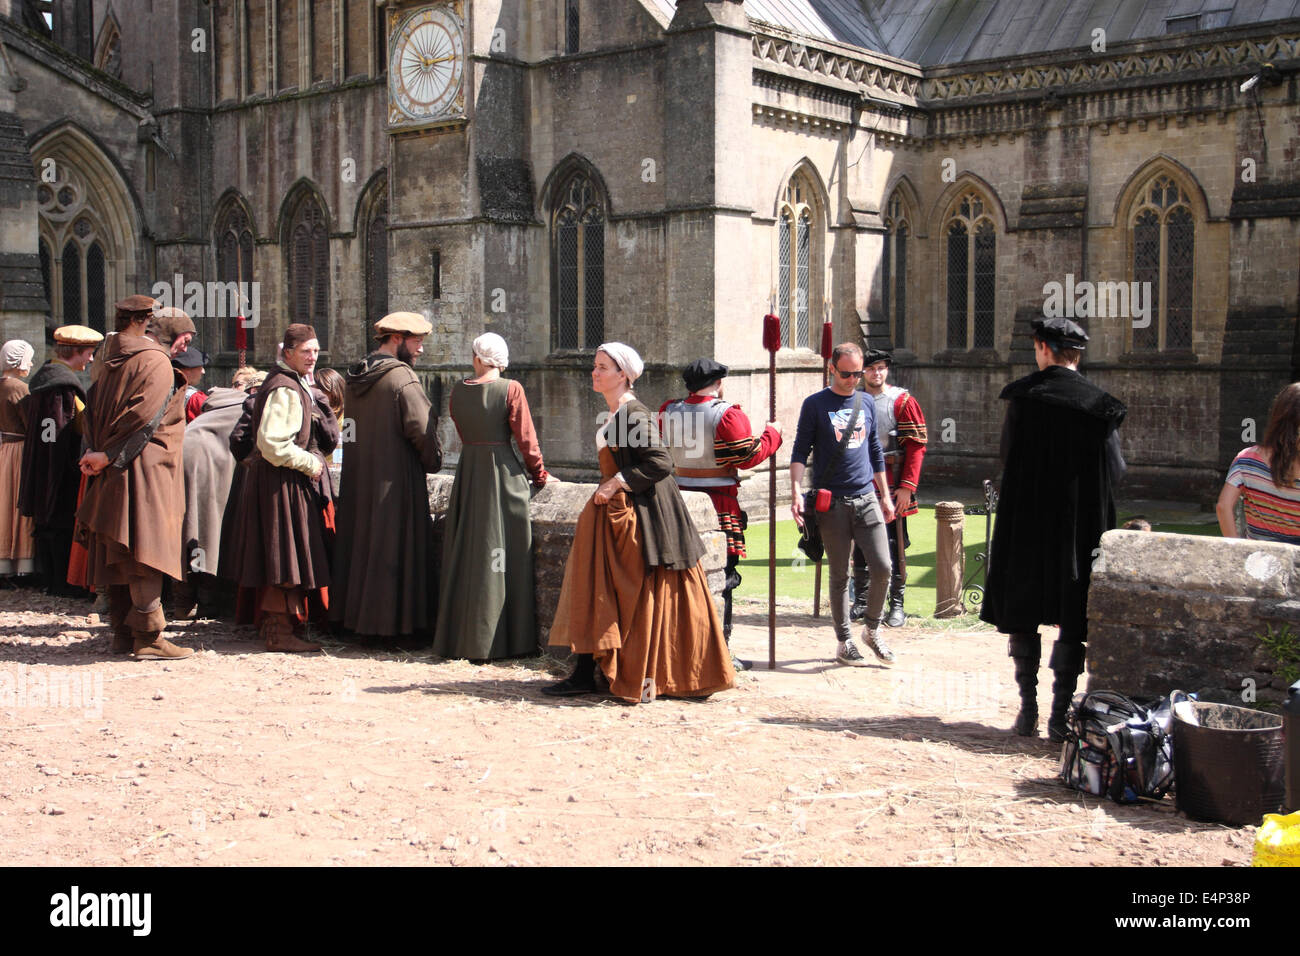 Wells, Somerset, UK. 15th July, 2014. The BBC are filming a new drama called 'Wolf Hall' based on the book by Hilary Mantel. The six part series focuses on the politics of despotism between King Henry VIII and Thomas Cromwell. Filming took place at Wells Cathedral today and the series will be screened in early 2015. Stock Photo